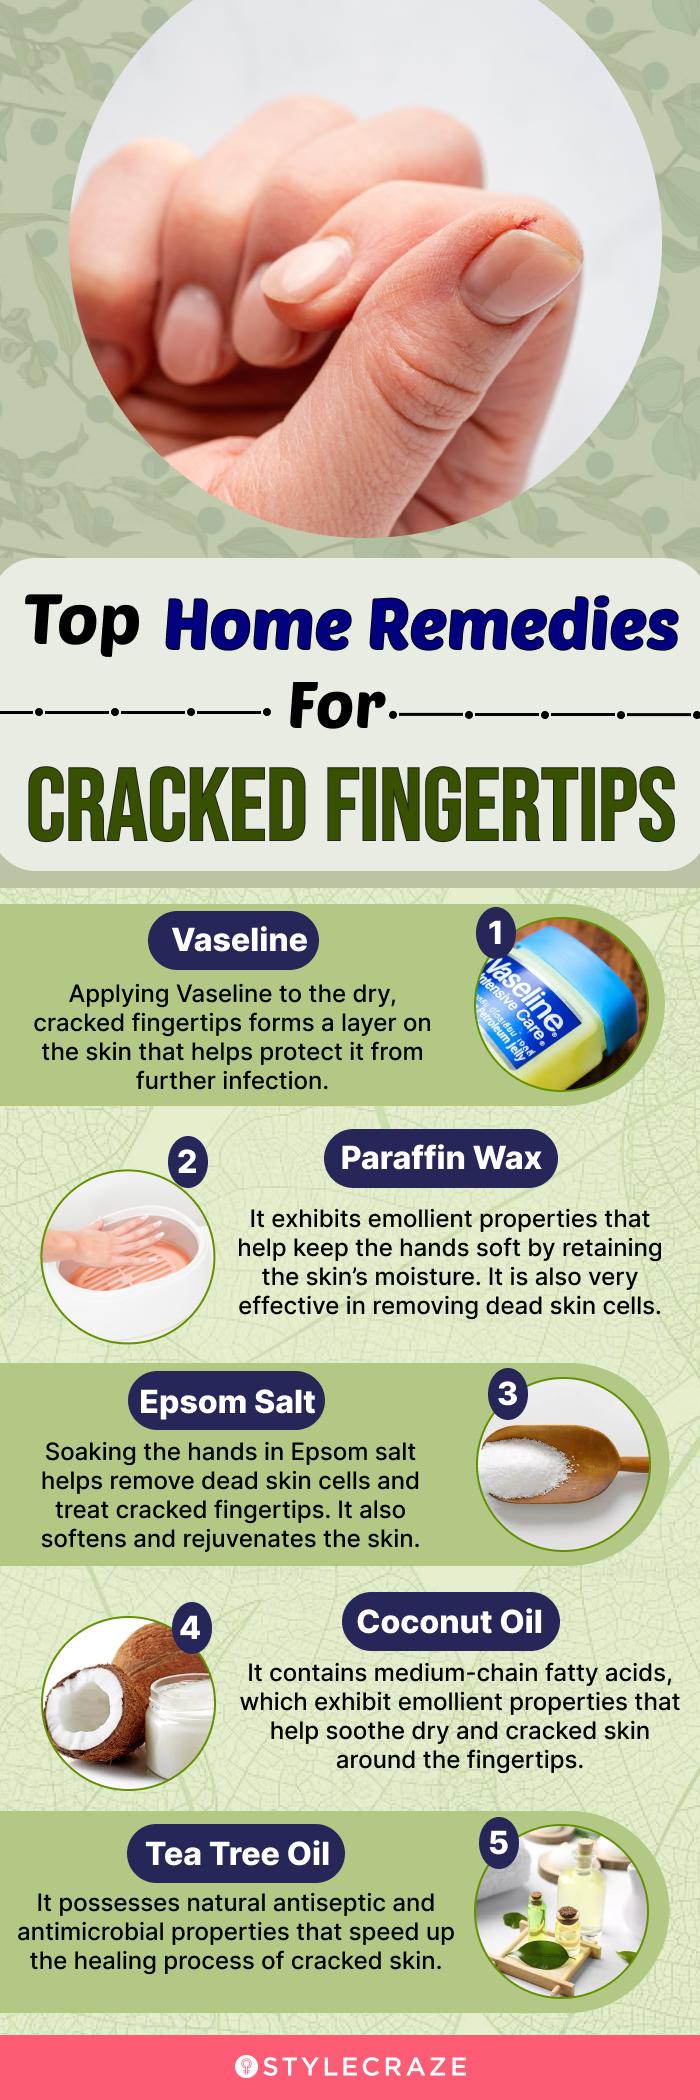 top home remedies for cracked fingertips (infographic)